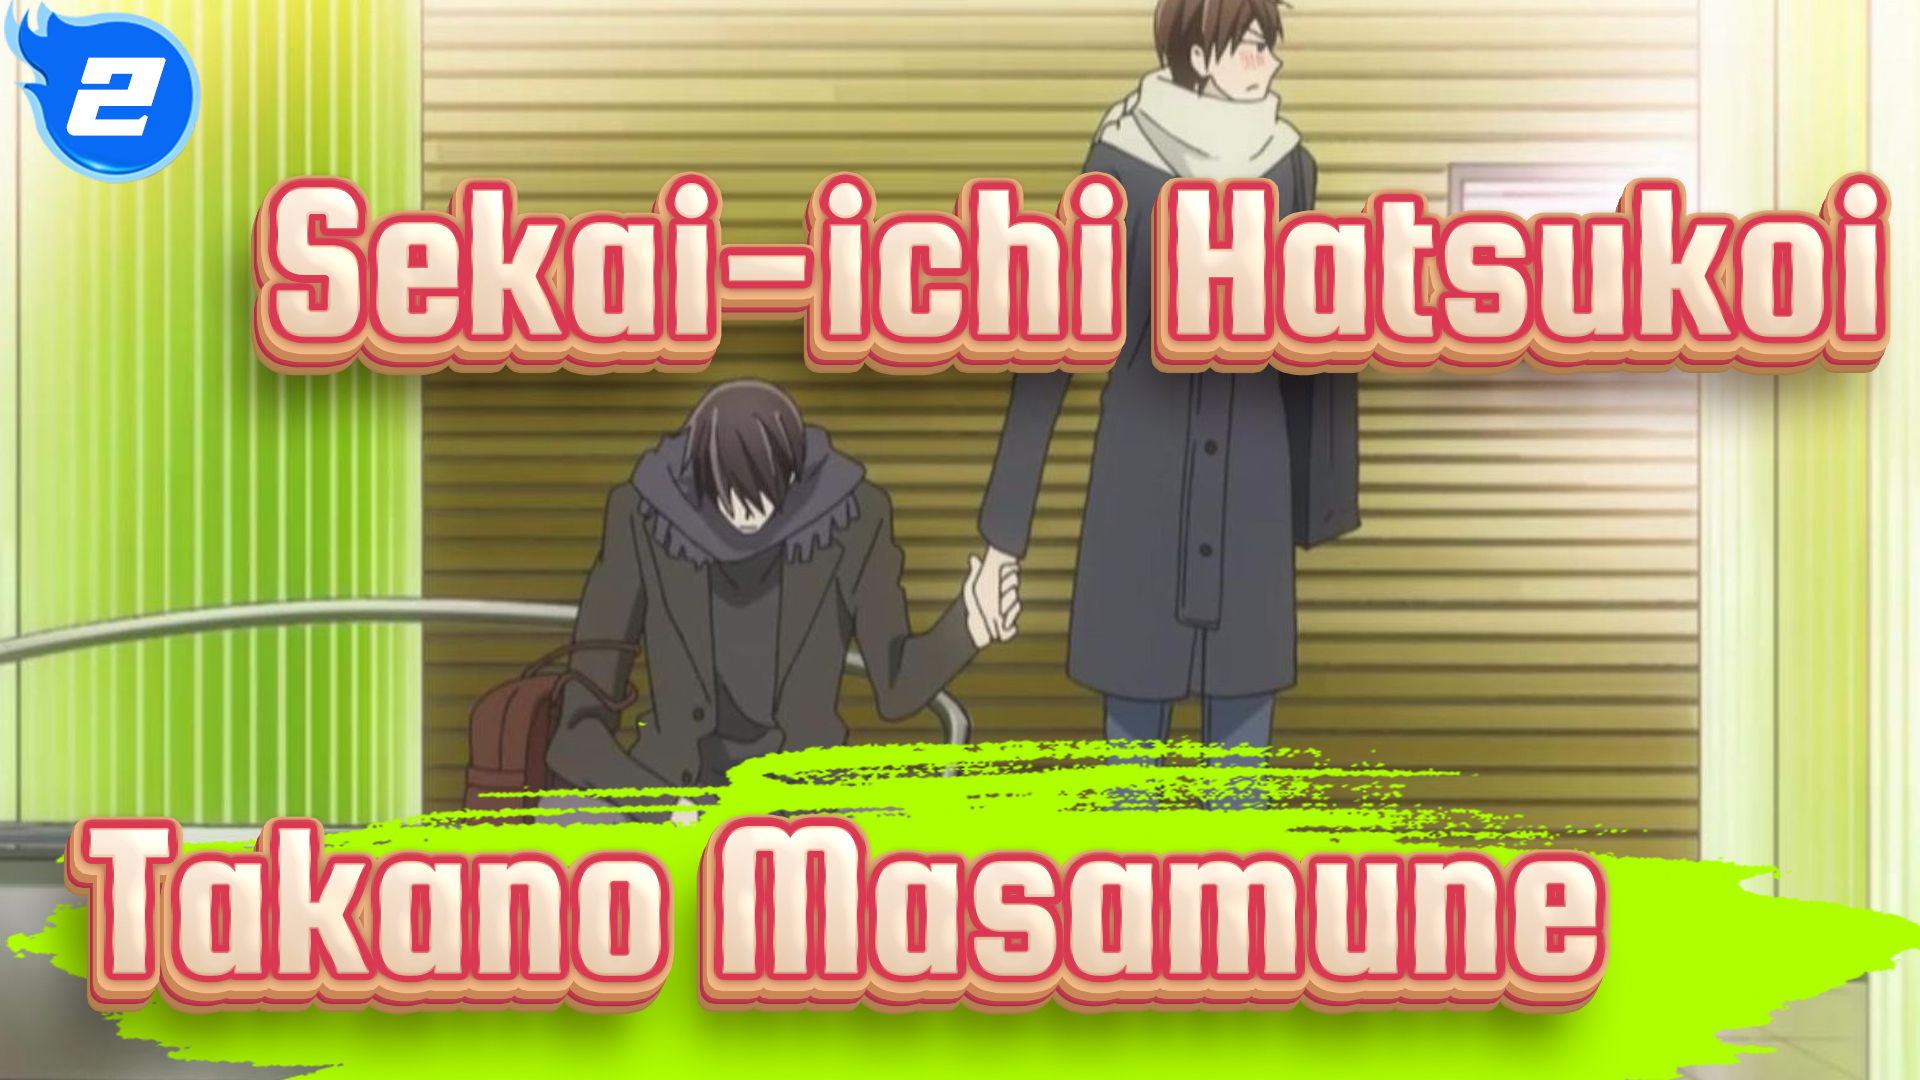 Does Onodera end up with Takano in Sekaiichi Hatsukoi? Does he tell him he  loves him? – Leo Sigh